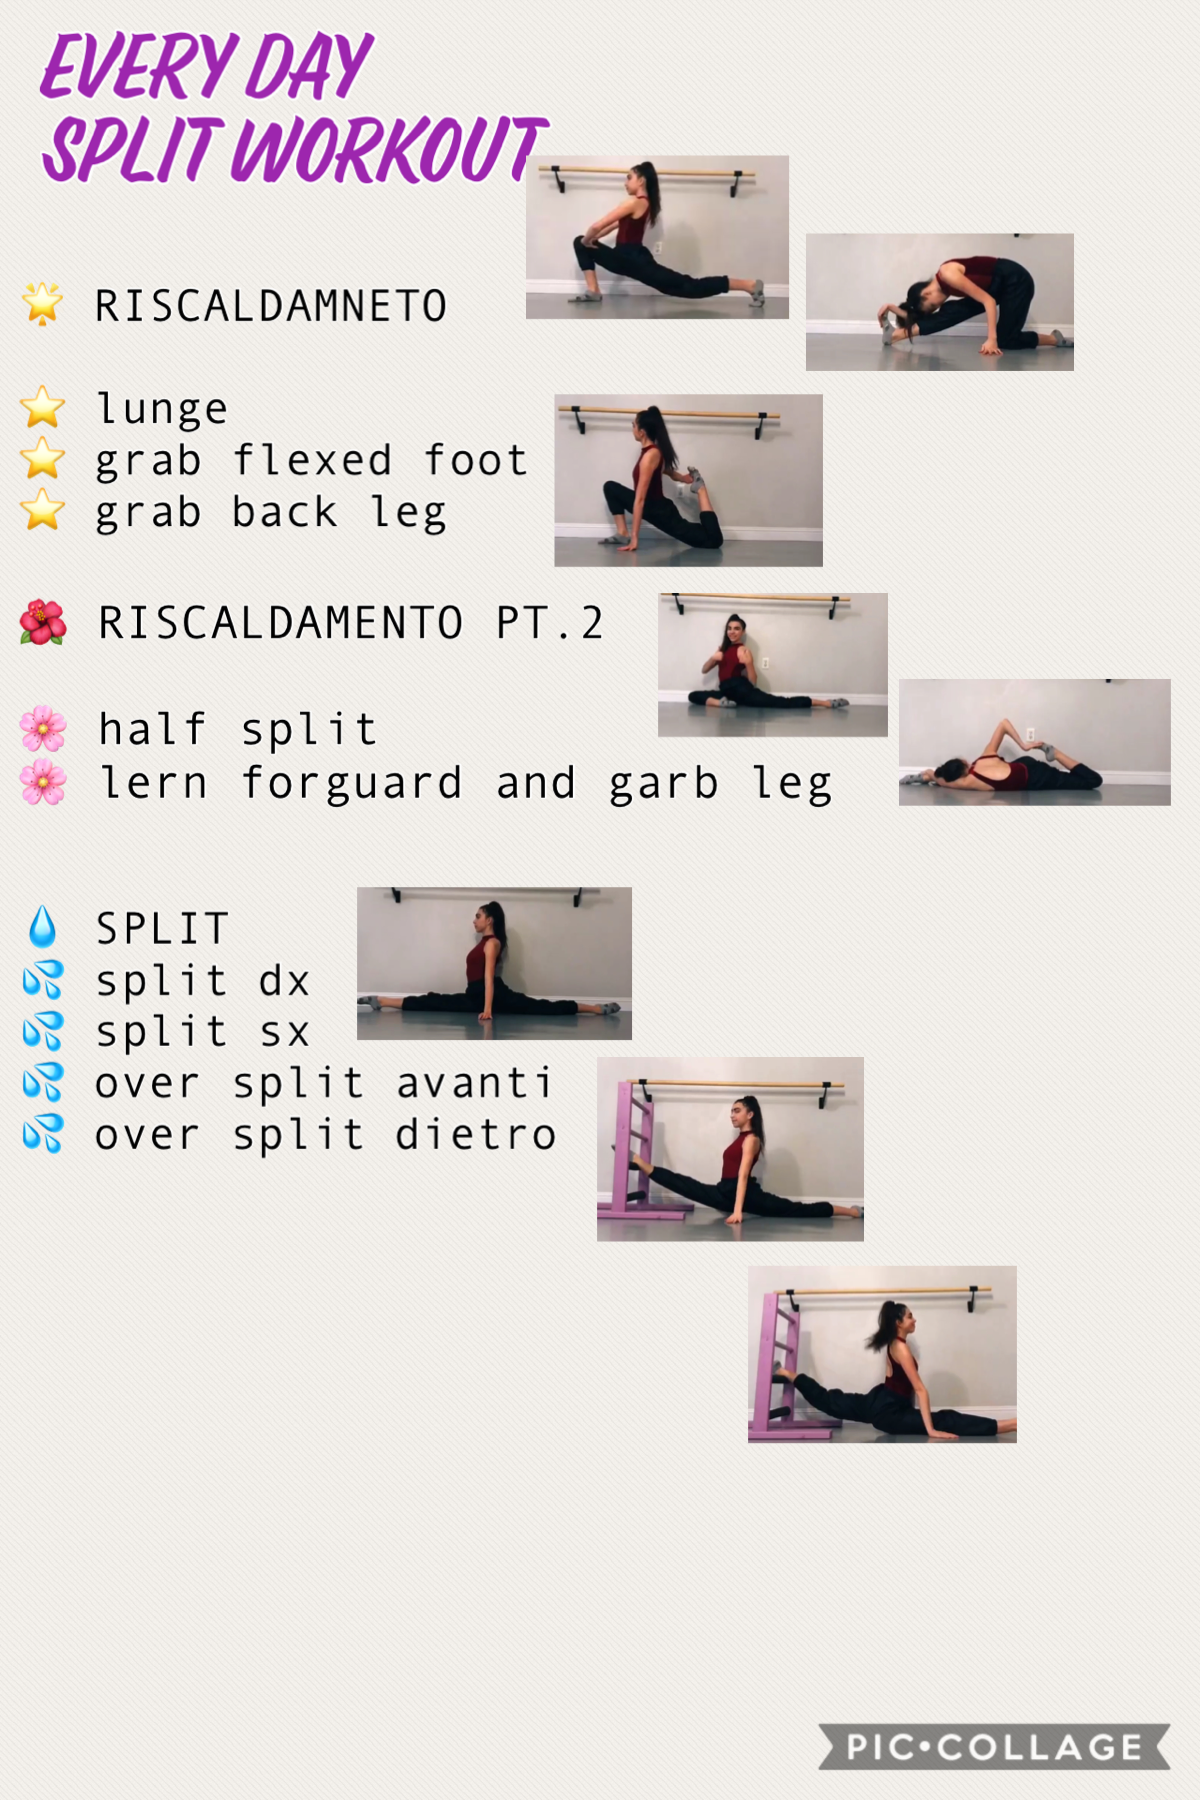 💜TAP💜






EVERY DAY split workout 
With photos ❣️
Love u ❤️- 